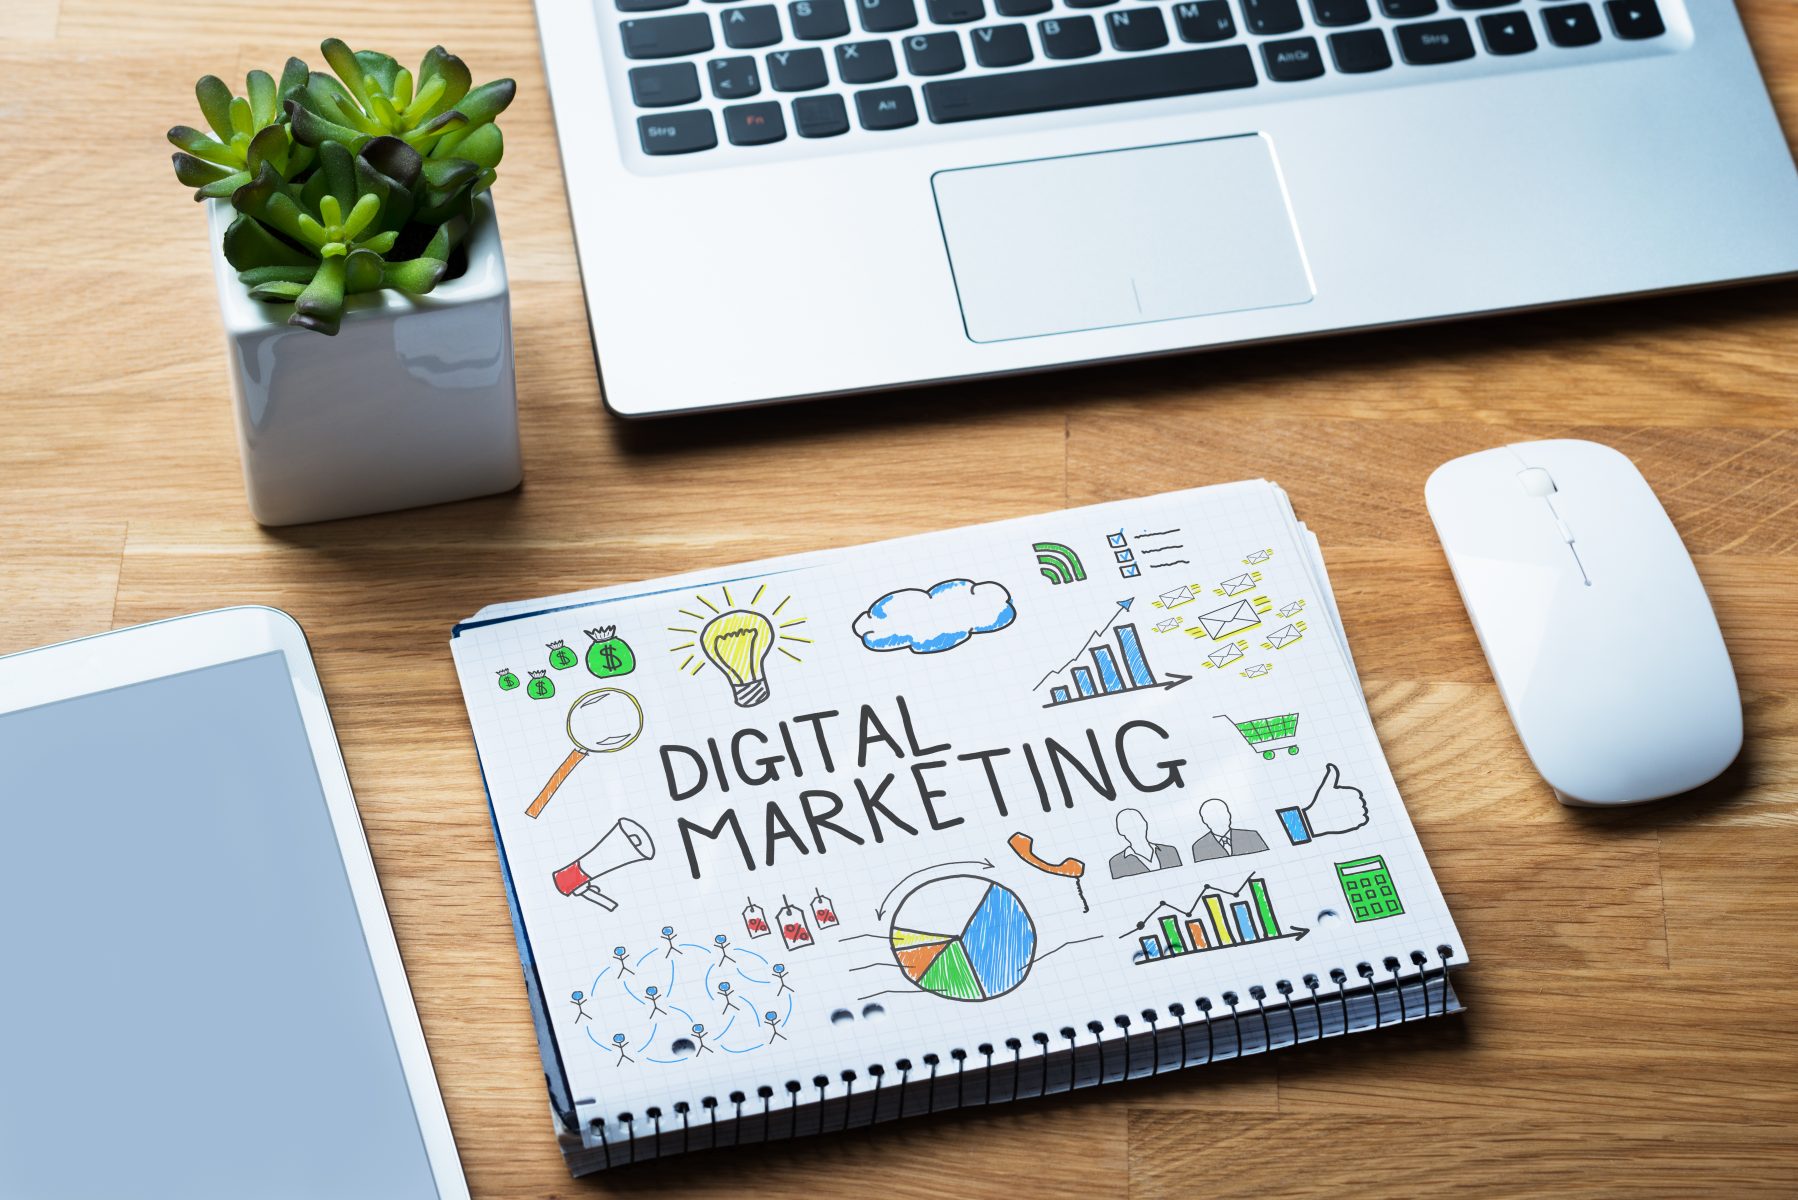 COVID-19 and Digital Marketing: Why It’s More Important than Ever to Have an Online Presence